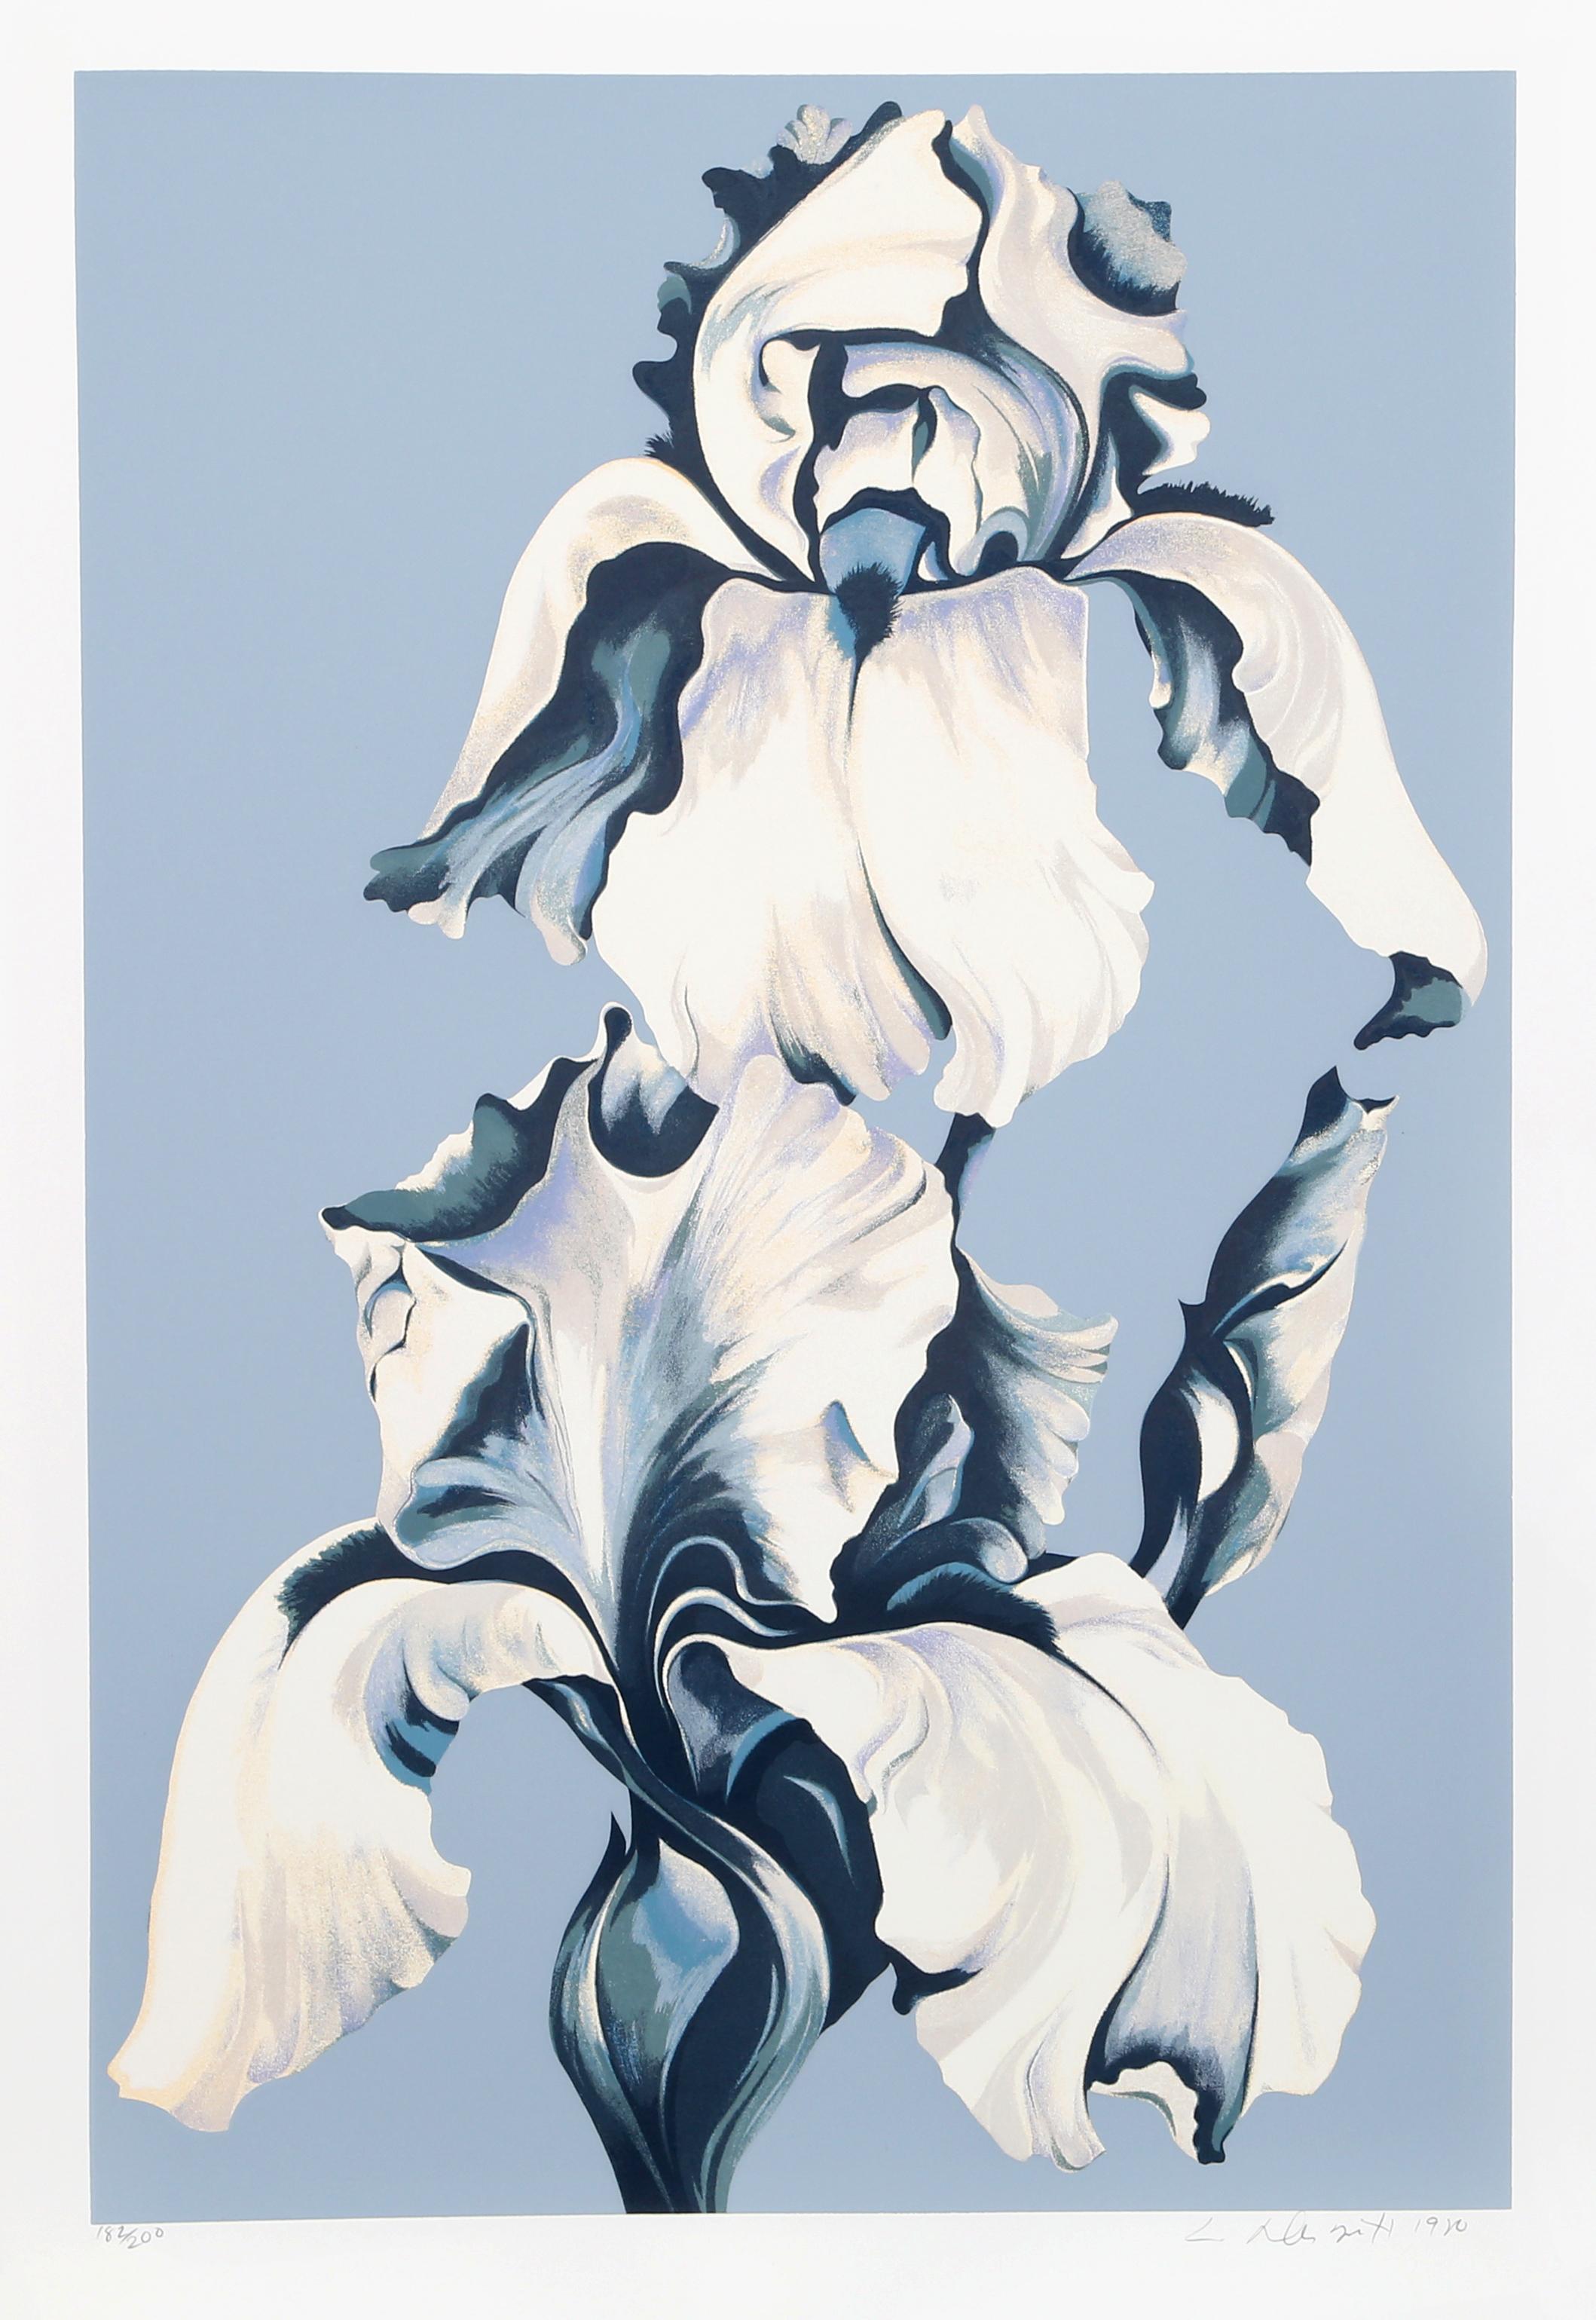 Artist: Lowell Blair Nesbitt, American (1933 - 1993)
Title: White Irises on Blue
Year: 1980
Medium: Screenprint, signed and numbered in pencil
Edition: 200, AP 30
Image Size: 41 x 23 inches
Size: 45 x 29 in. (114.3 x 73.66 cm)